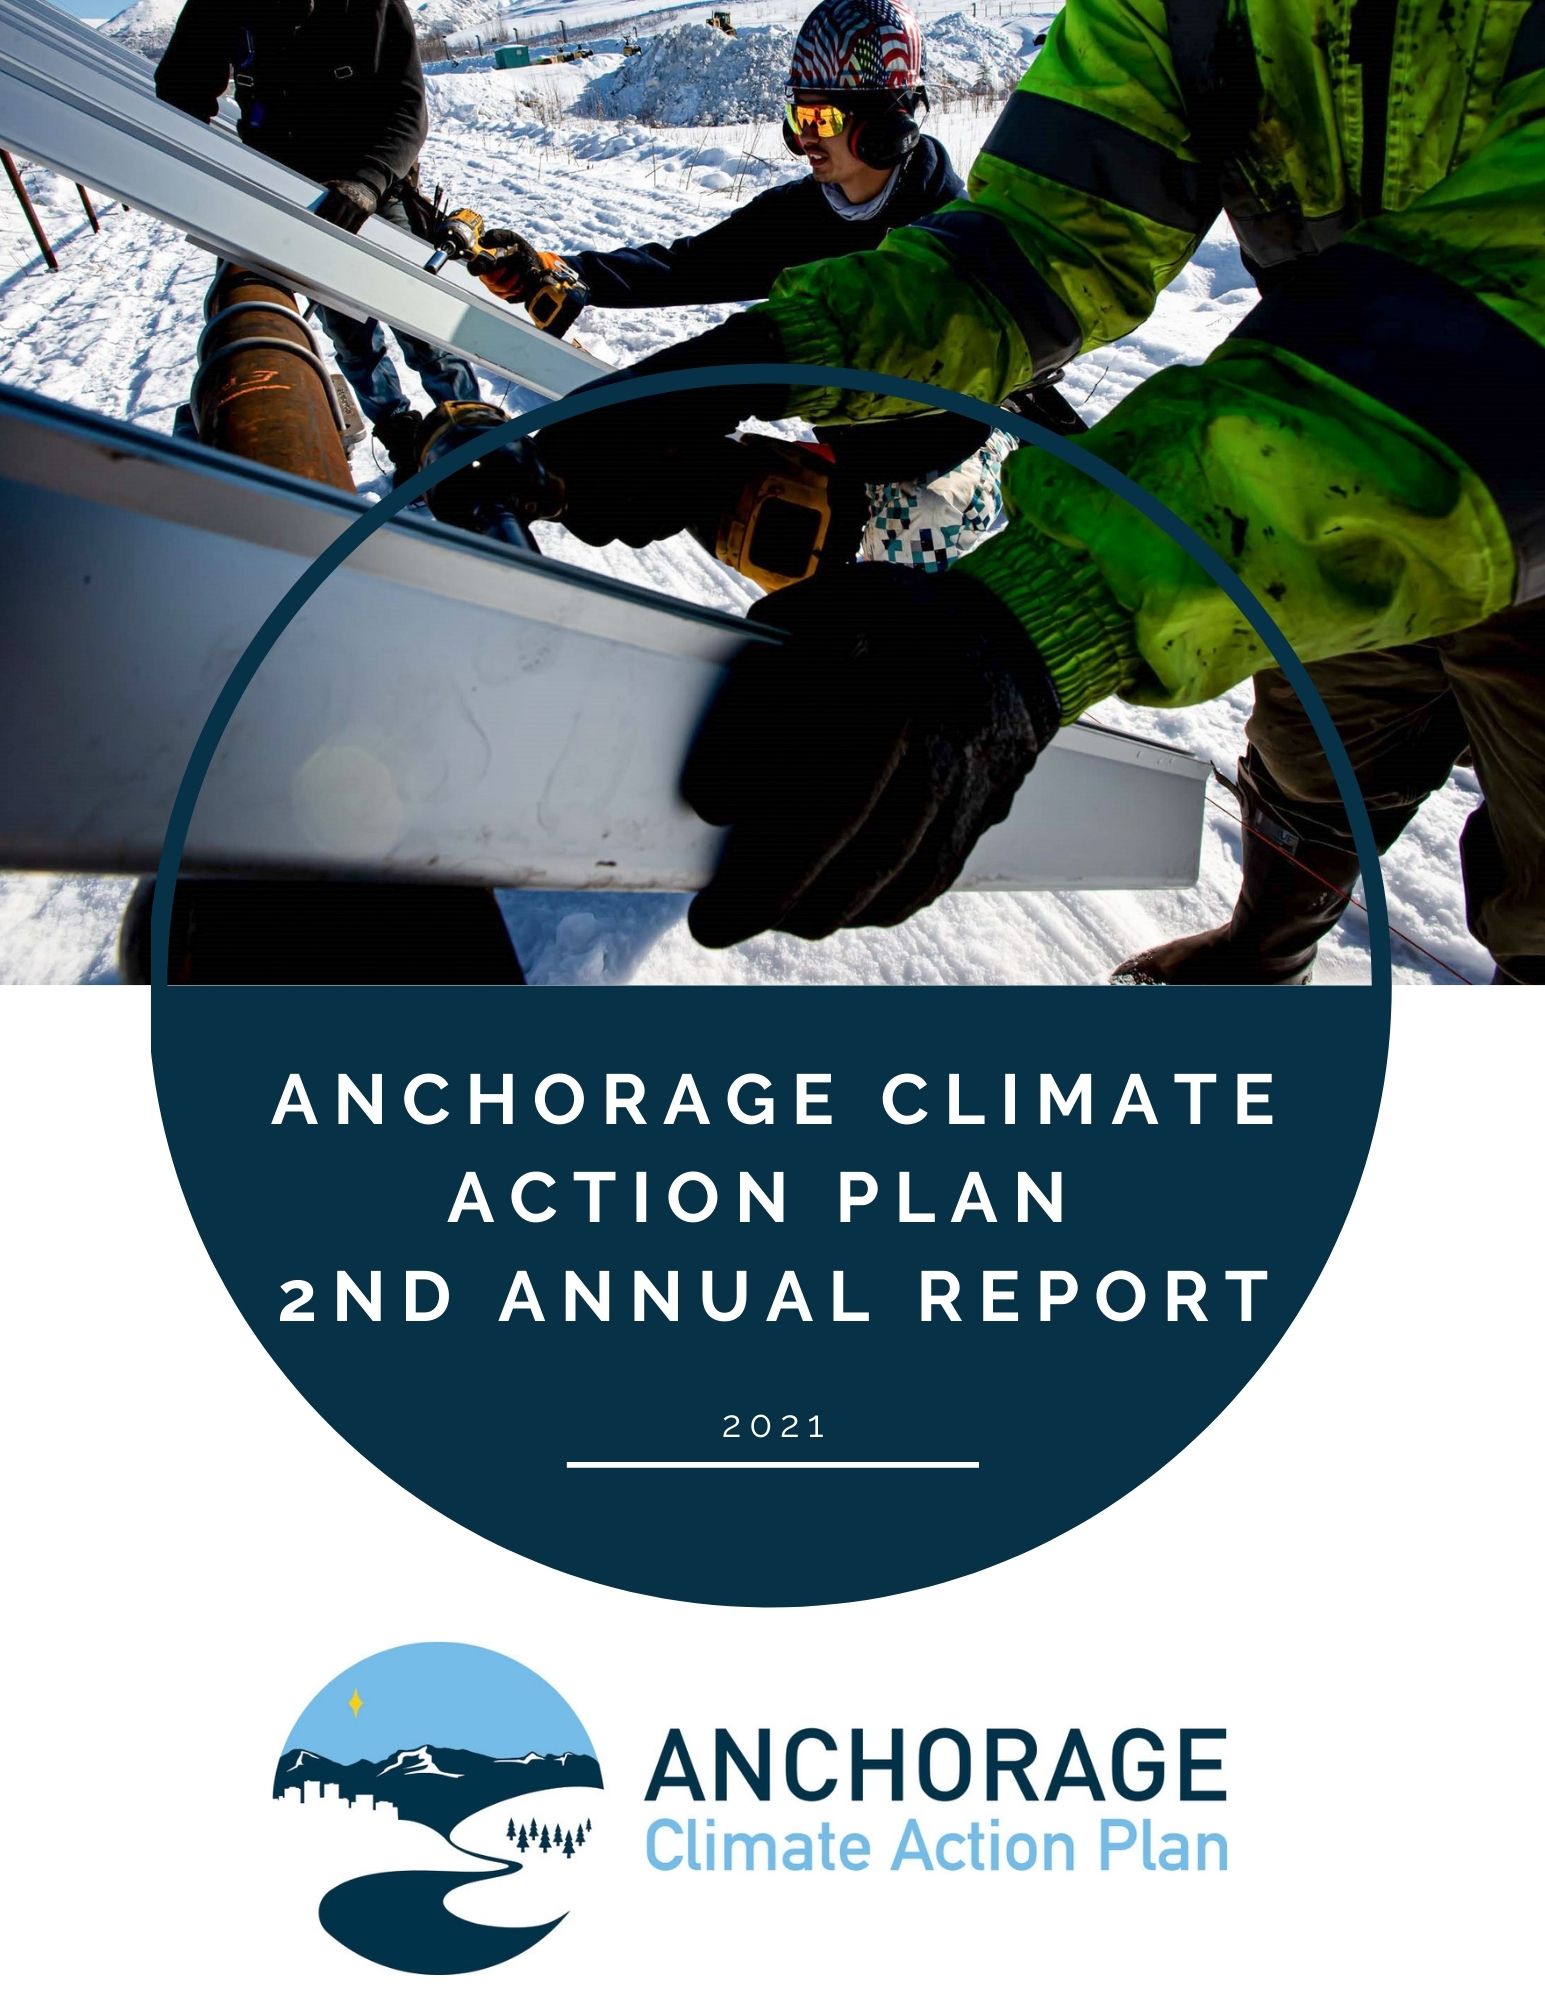 Anchorage Climate Action Plan Annual Report (2)_Small.jpg